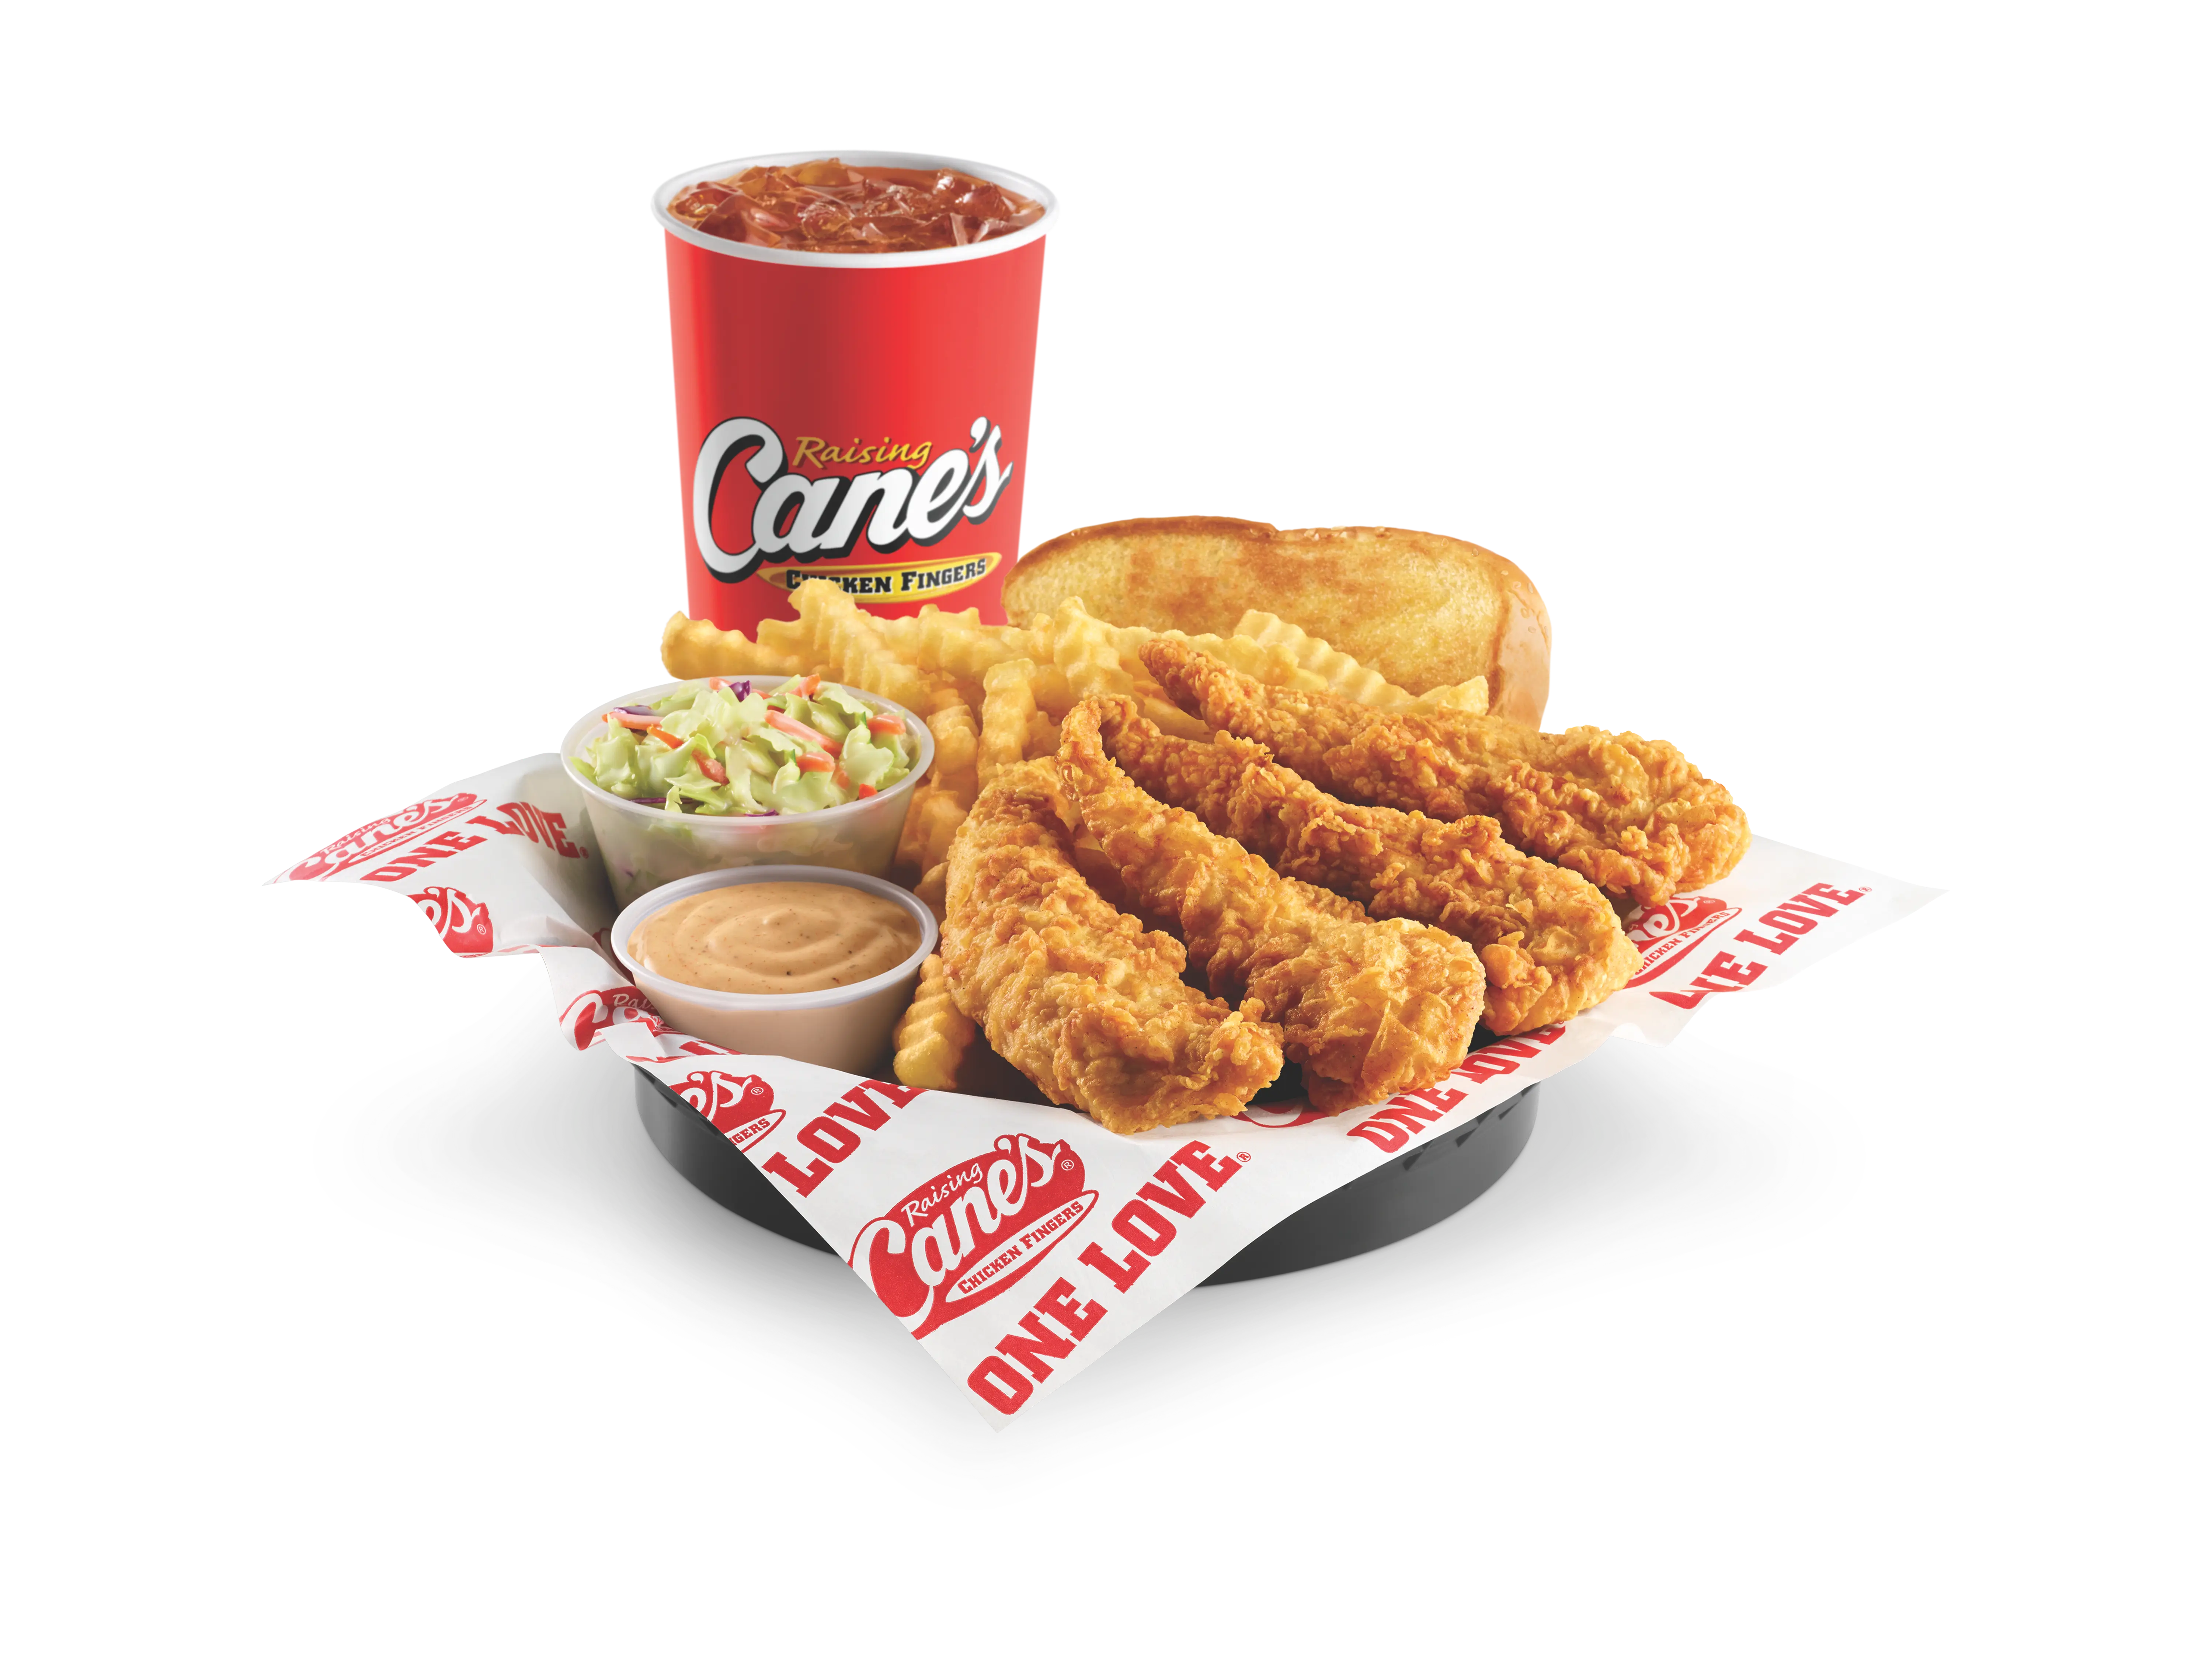 Raising Cane's Perfect Meal